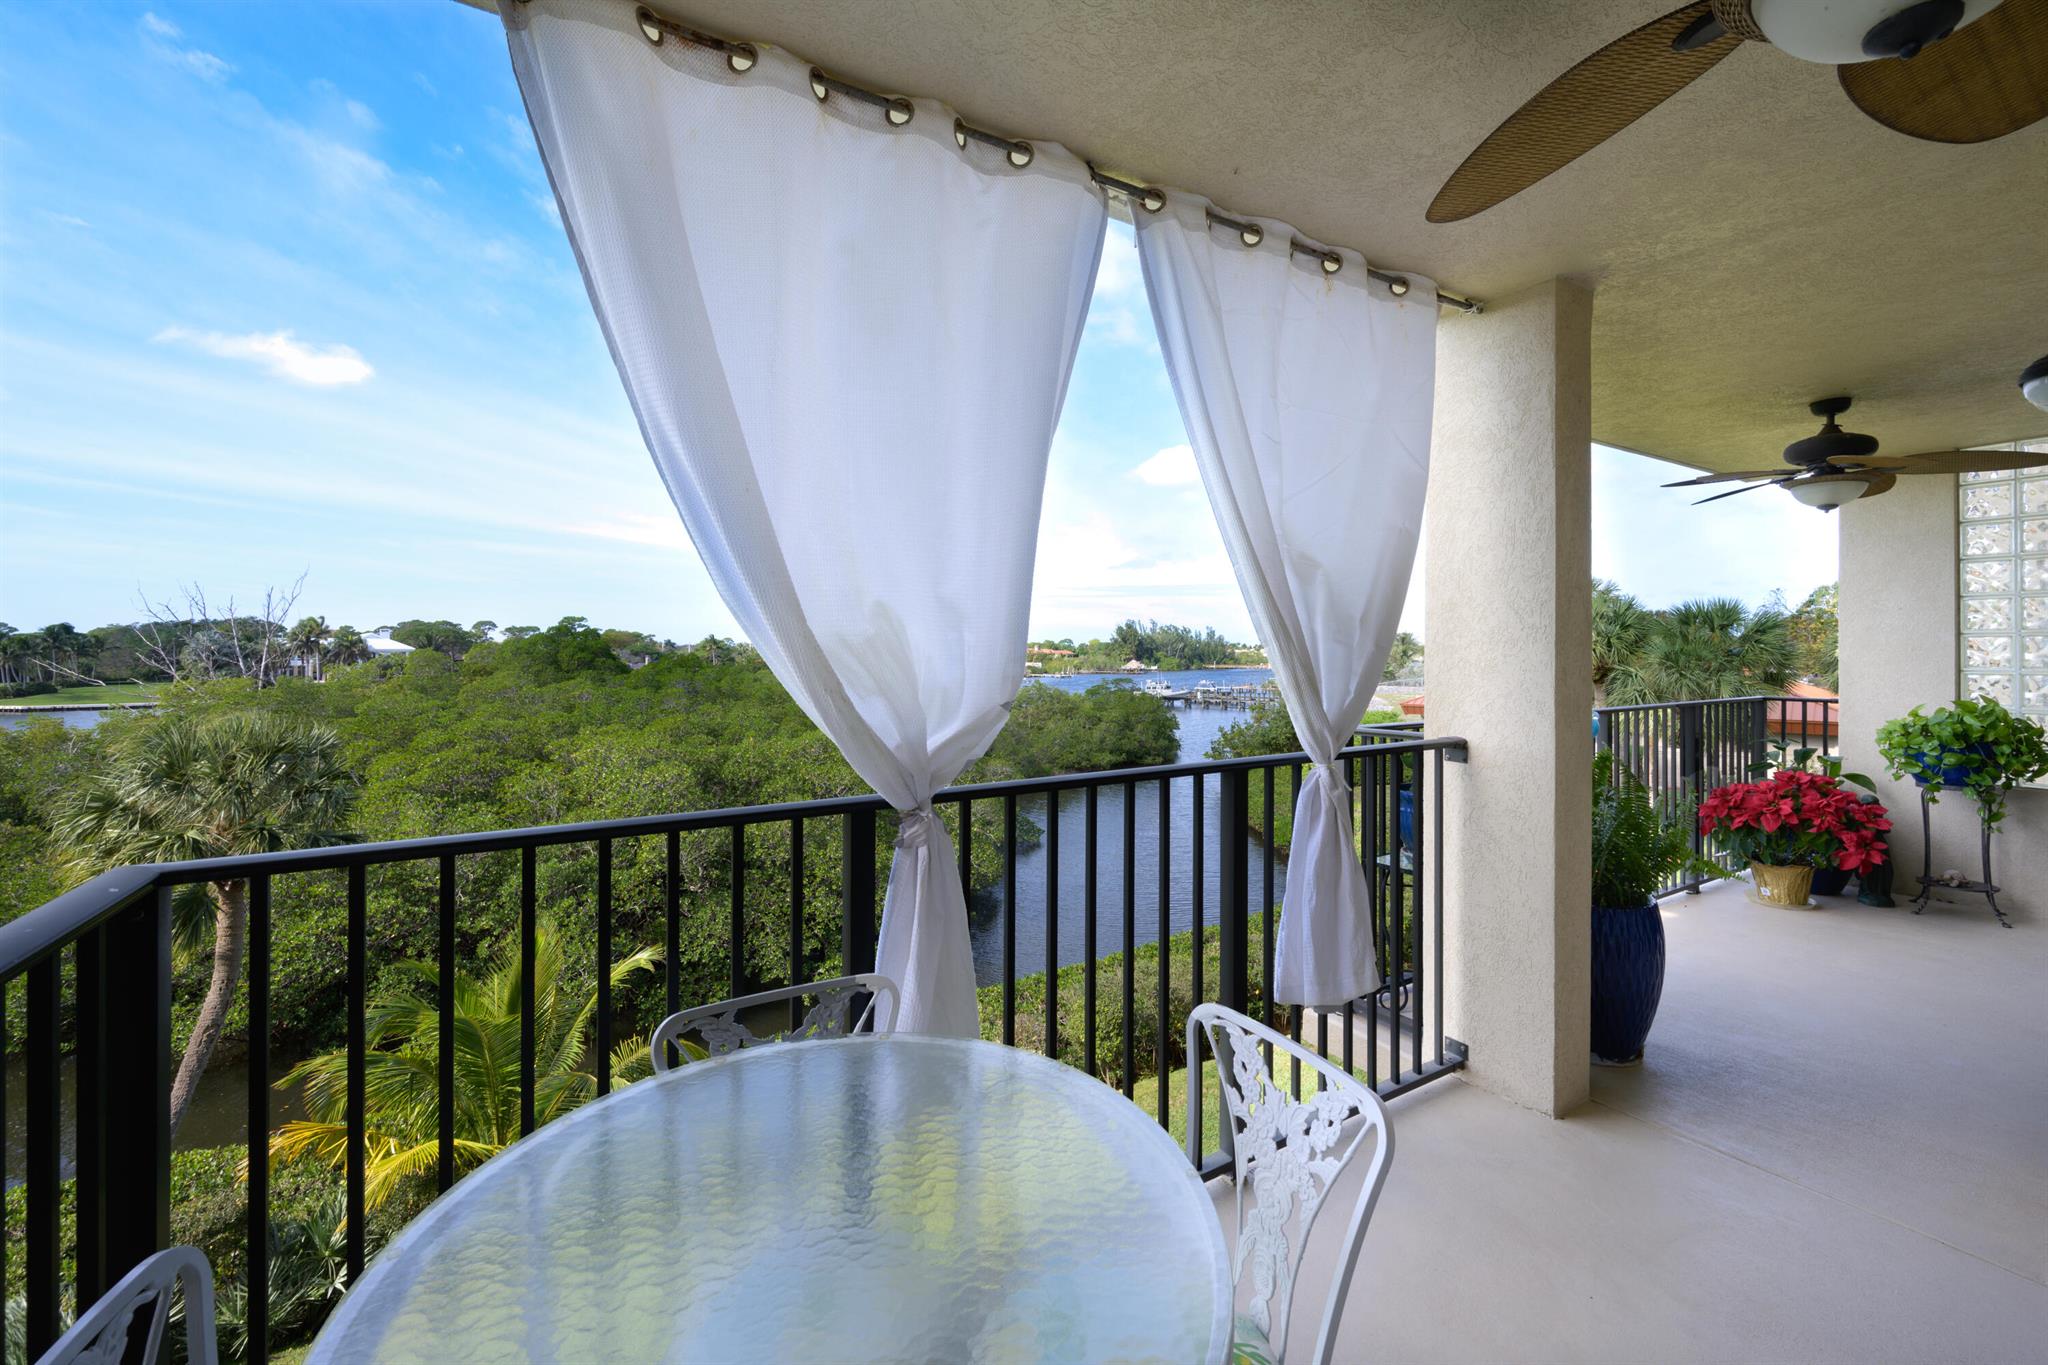 Enjoy sunset and sunrise views in this popular building. Both ''old Florida'' intracoastal views of mangroves, manatees,& herons, (plus boats sailing by) to the west,  and a deep water Marina to the east, this location is the best! The balcony is approx 9 years old; roof 3 yrs, a/c replaced in 2021. Custom kitchen with extended quartz counters with room for a bistro table at window. Impact windows and doors, porcelain floors in living areas. Lots of storage, and steps from elevator. Bike or walk to Publix, restaurants, and ocean. 4 pools to choose from. Feel like you are on vacation all year long.Ok to lease 2 x a year, after owning one year. Condo fee pd qtrly $1,918.52.Elevator assessment has been paid.Please note low homesteaded taxes.